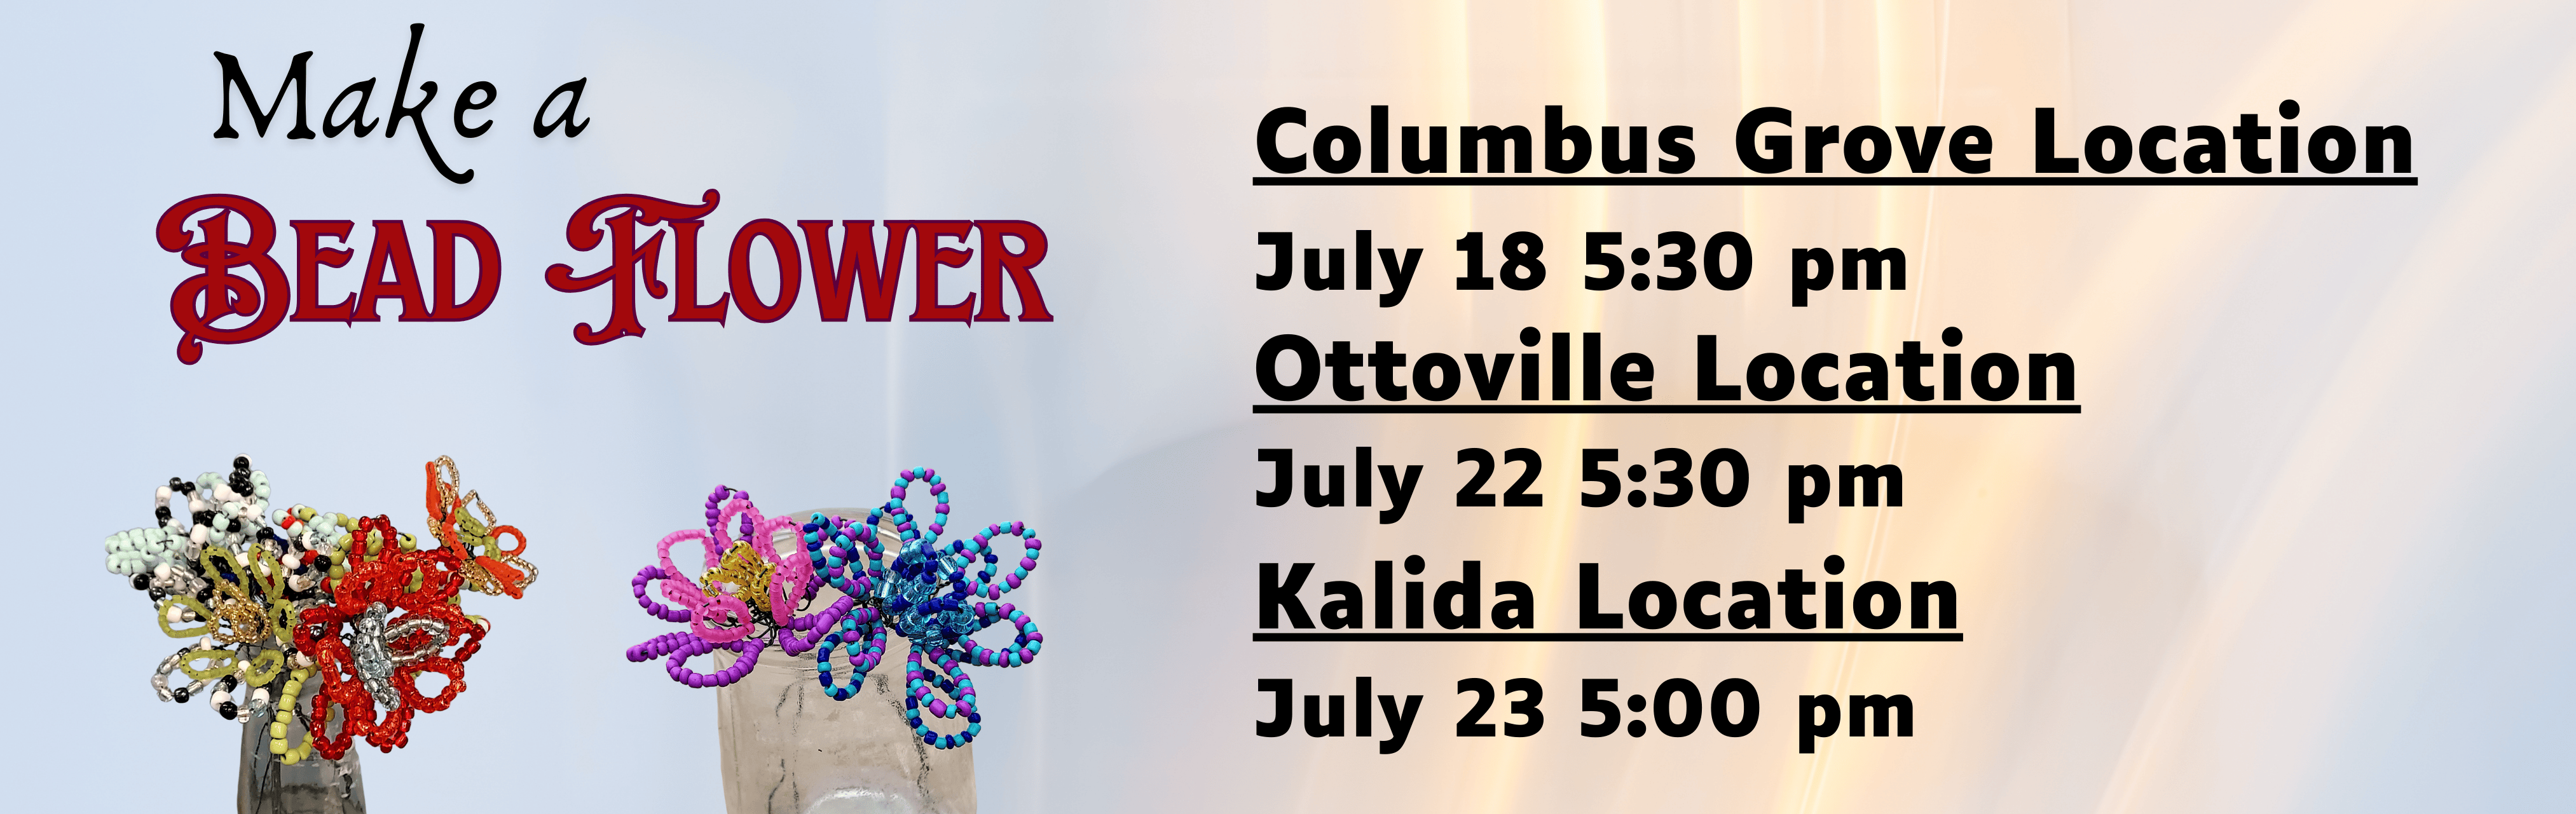 2 vases with bead flowers Make a bead flower Columbus Grove Location July 18 5:30 pm, Ottoville Location July 22 5:30 pm Kalida Location July 23 5 pm